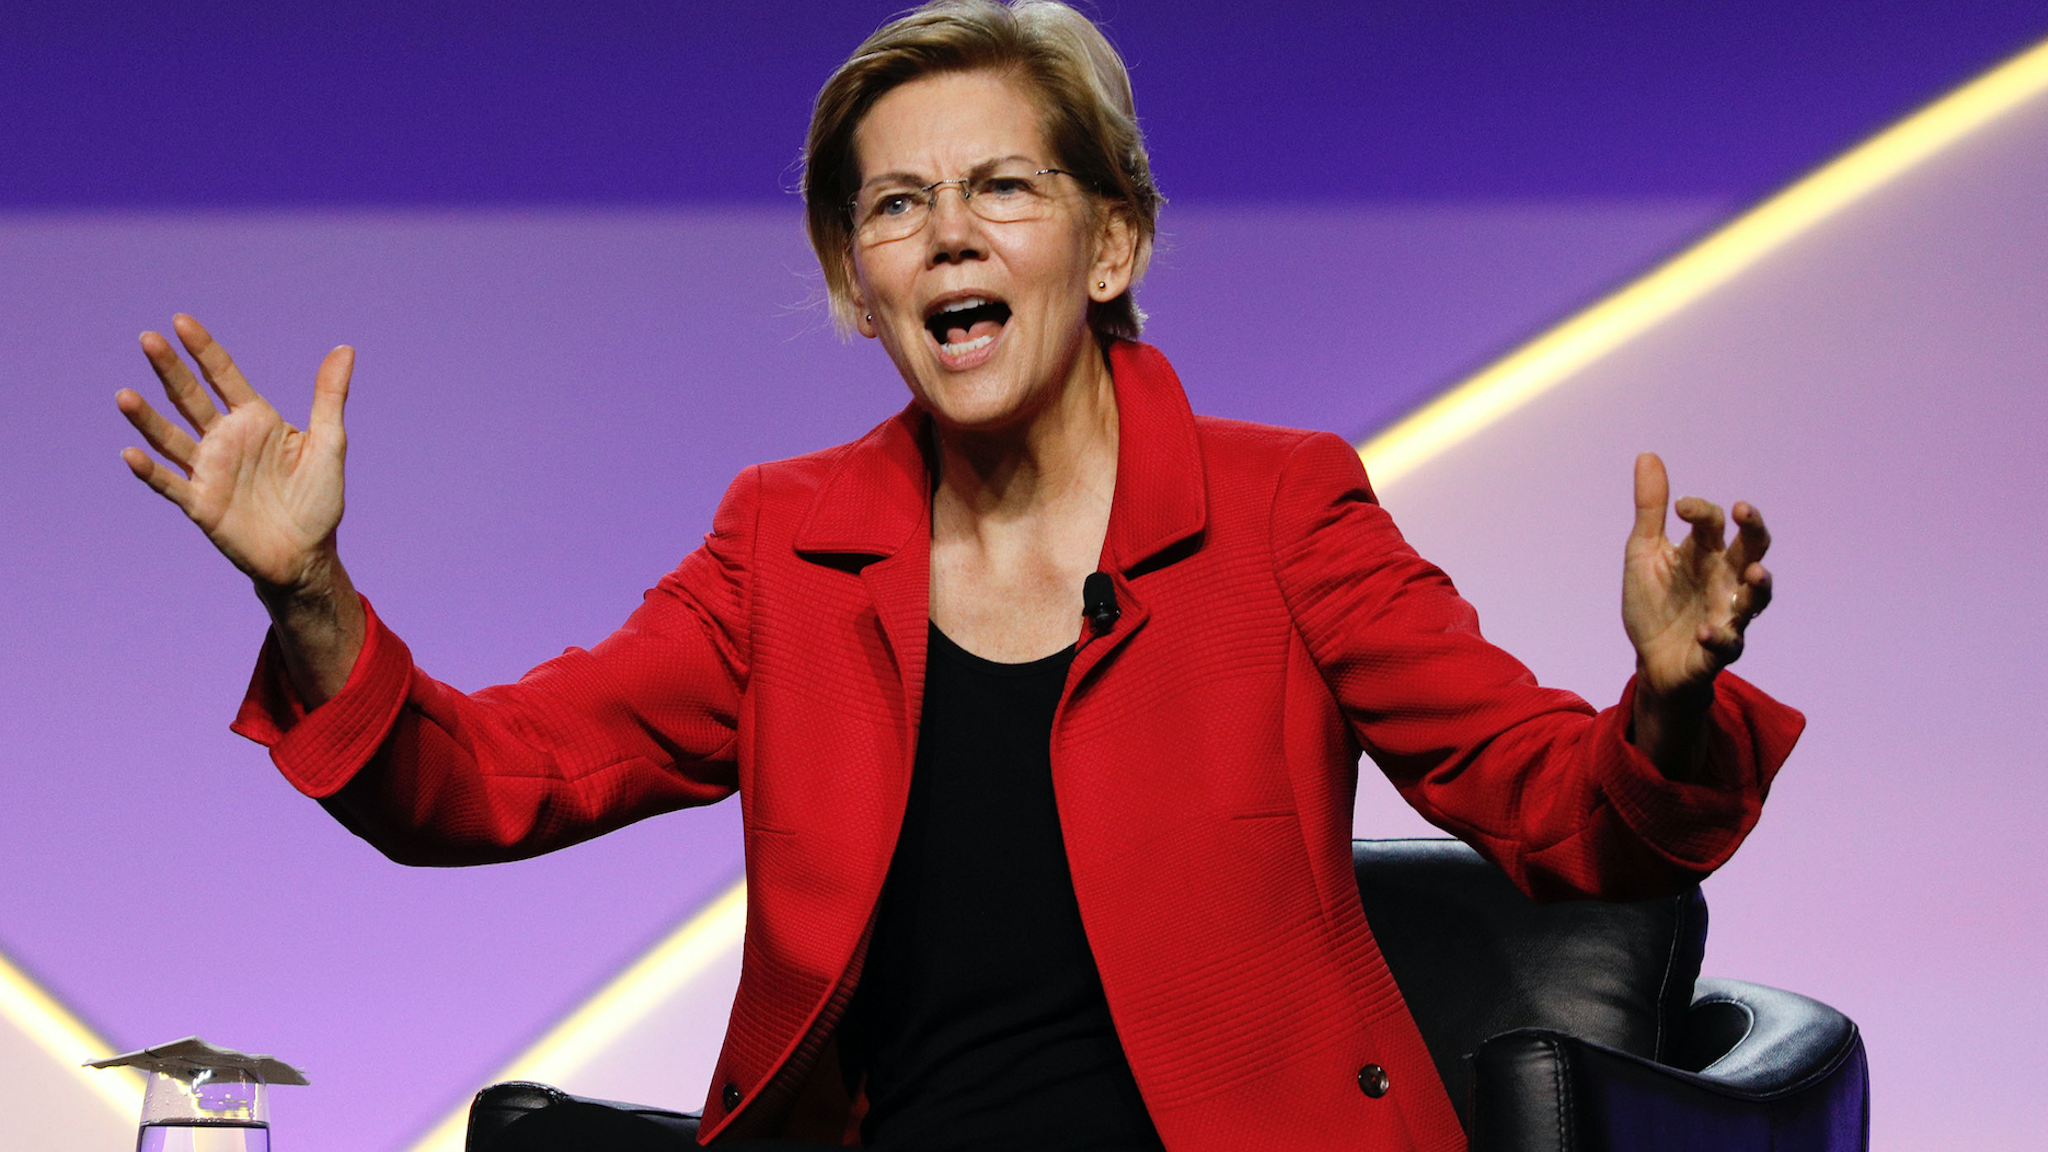 Democratic presidential candidate U.S. Sen. Elizabeth Warren (D-MA) participates in a Presidential Candidates Forum at the NAACP 110th National Convention on July 24, 2019 in Detroit, Michigan. The theme of this years Convention is, When We Fight, We Win.